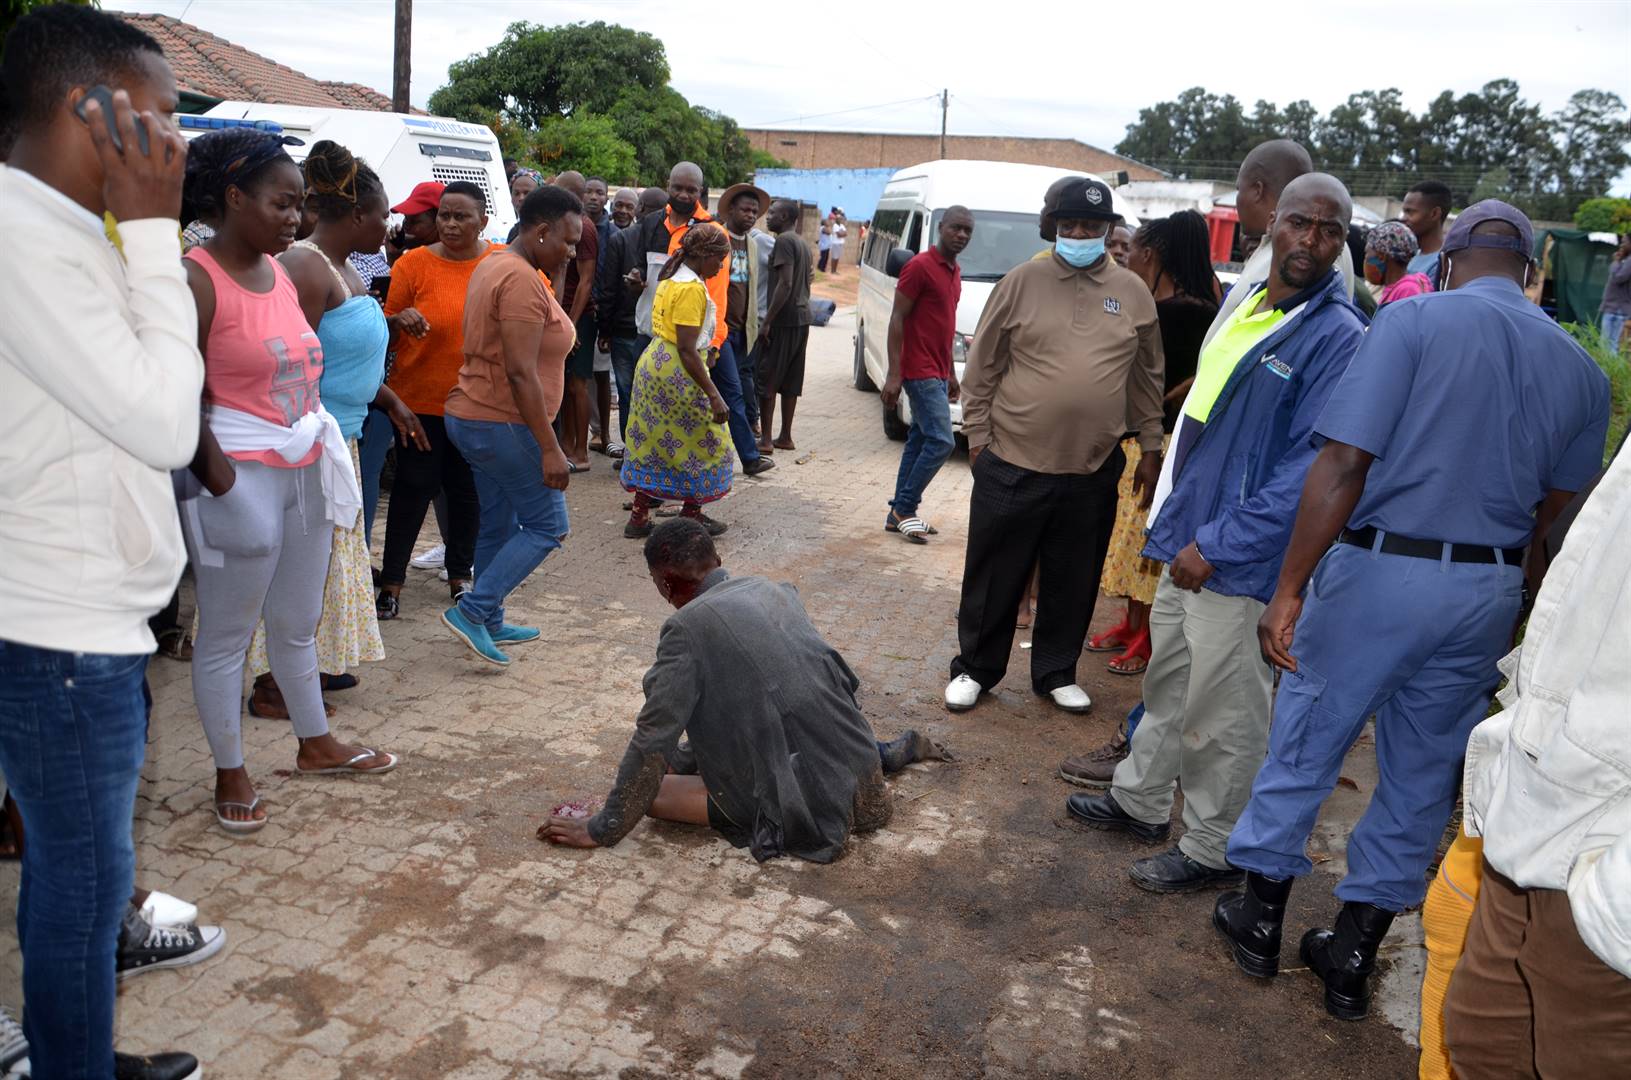 A nyaope gangster was moered by angry residents before being rescued by the police.    Photo by Oris Mnisi 